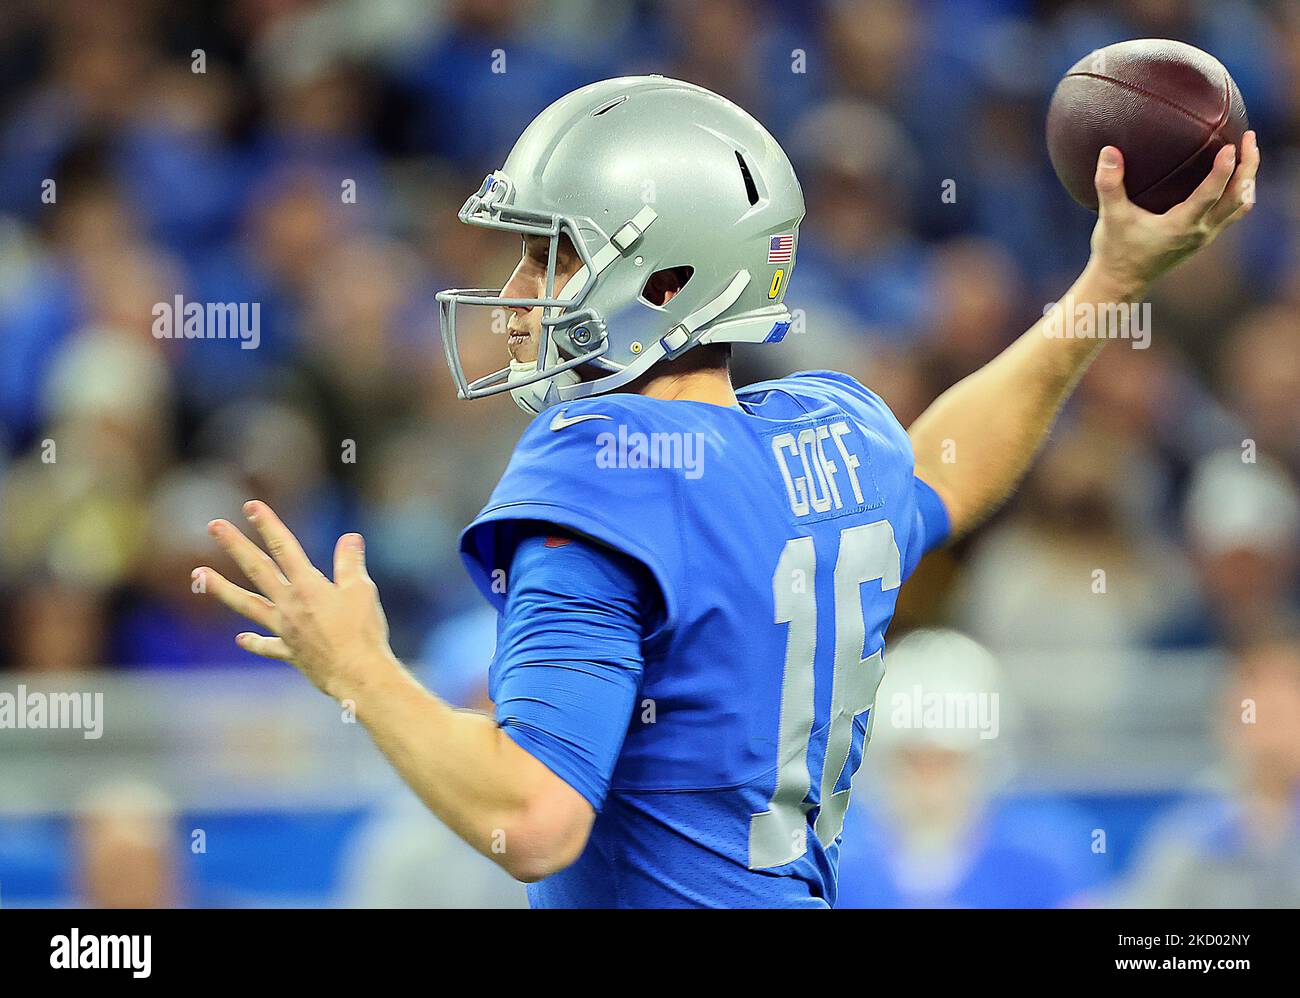 Detroit Lions quarterback Jared Goff (16) throws the ball during an NFL football game between the Detroit Lions and the Green Bay Packers in Detroit, Michigan USA, on Sunday, January 9, 2022. (Photo by Amy Lemus/NurPhoto) Stock Photo